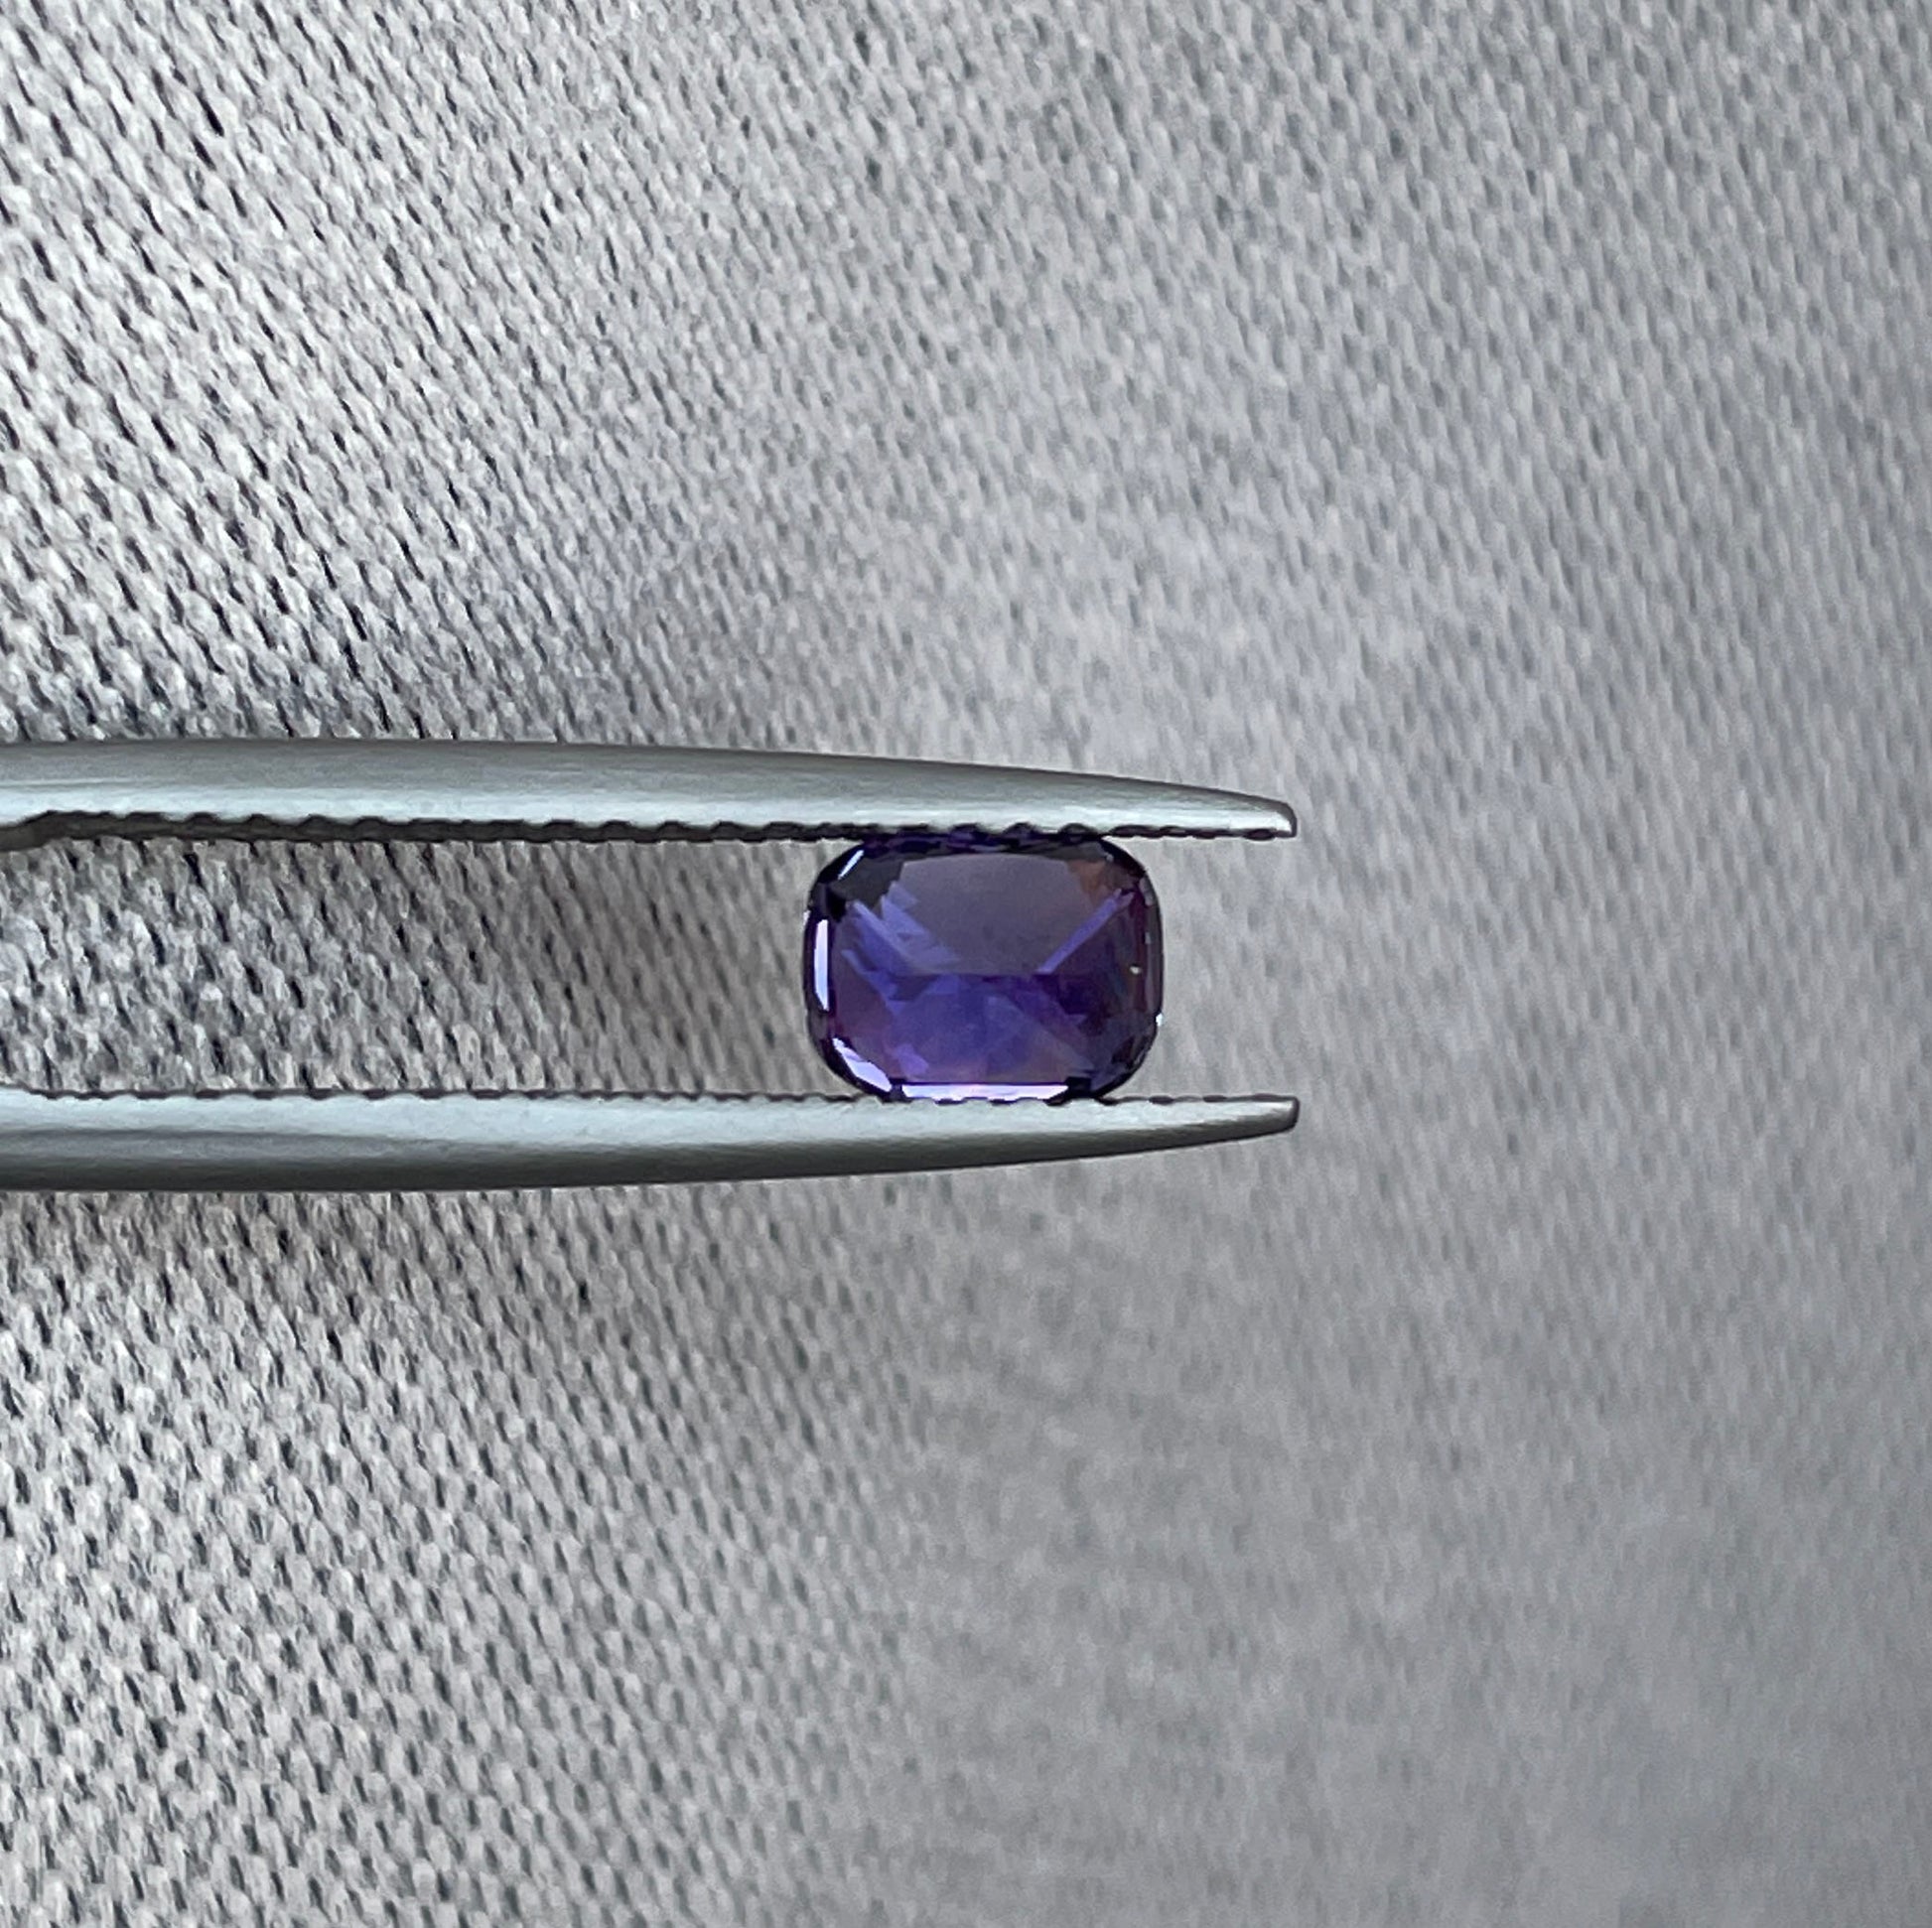 AAA Color change Ceylon violet Sapphire Loose cushion Cut Gemstone, Fine Quality violet Sapphire Ring And Jewelry Making Gemstone 1.02 Ct